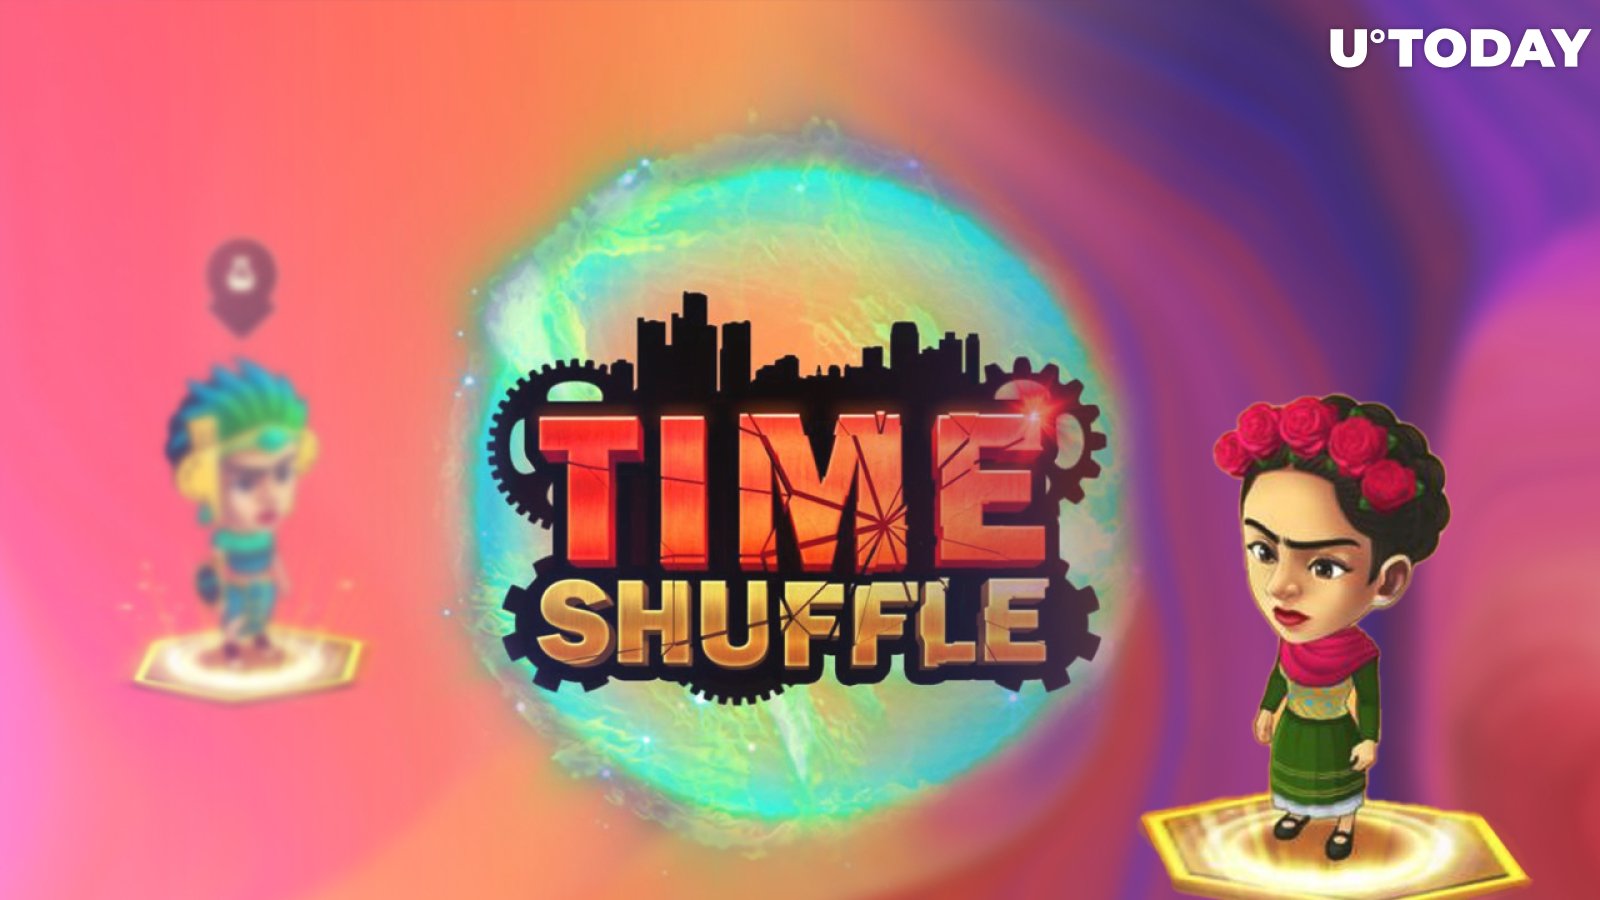 TimeShuffle Closes $2.1 Million Seed Round, Led by Heavyweight VCs Shima Capital and Avalanche Ecosystem